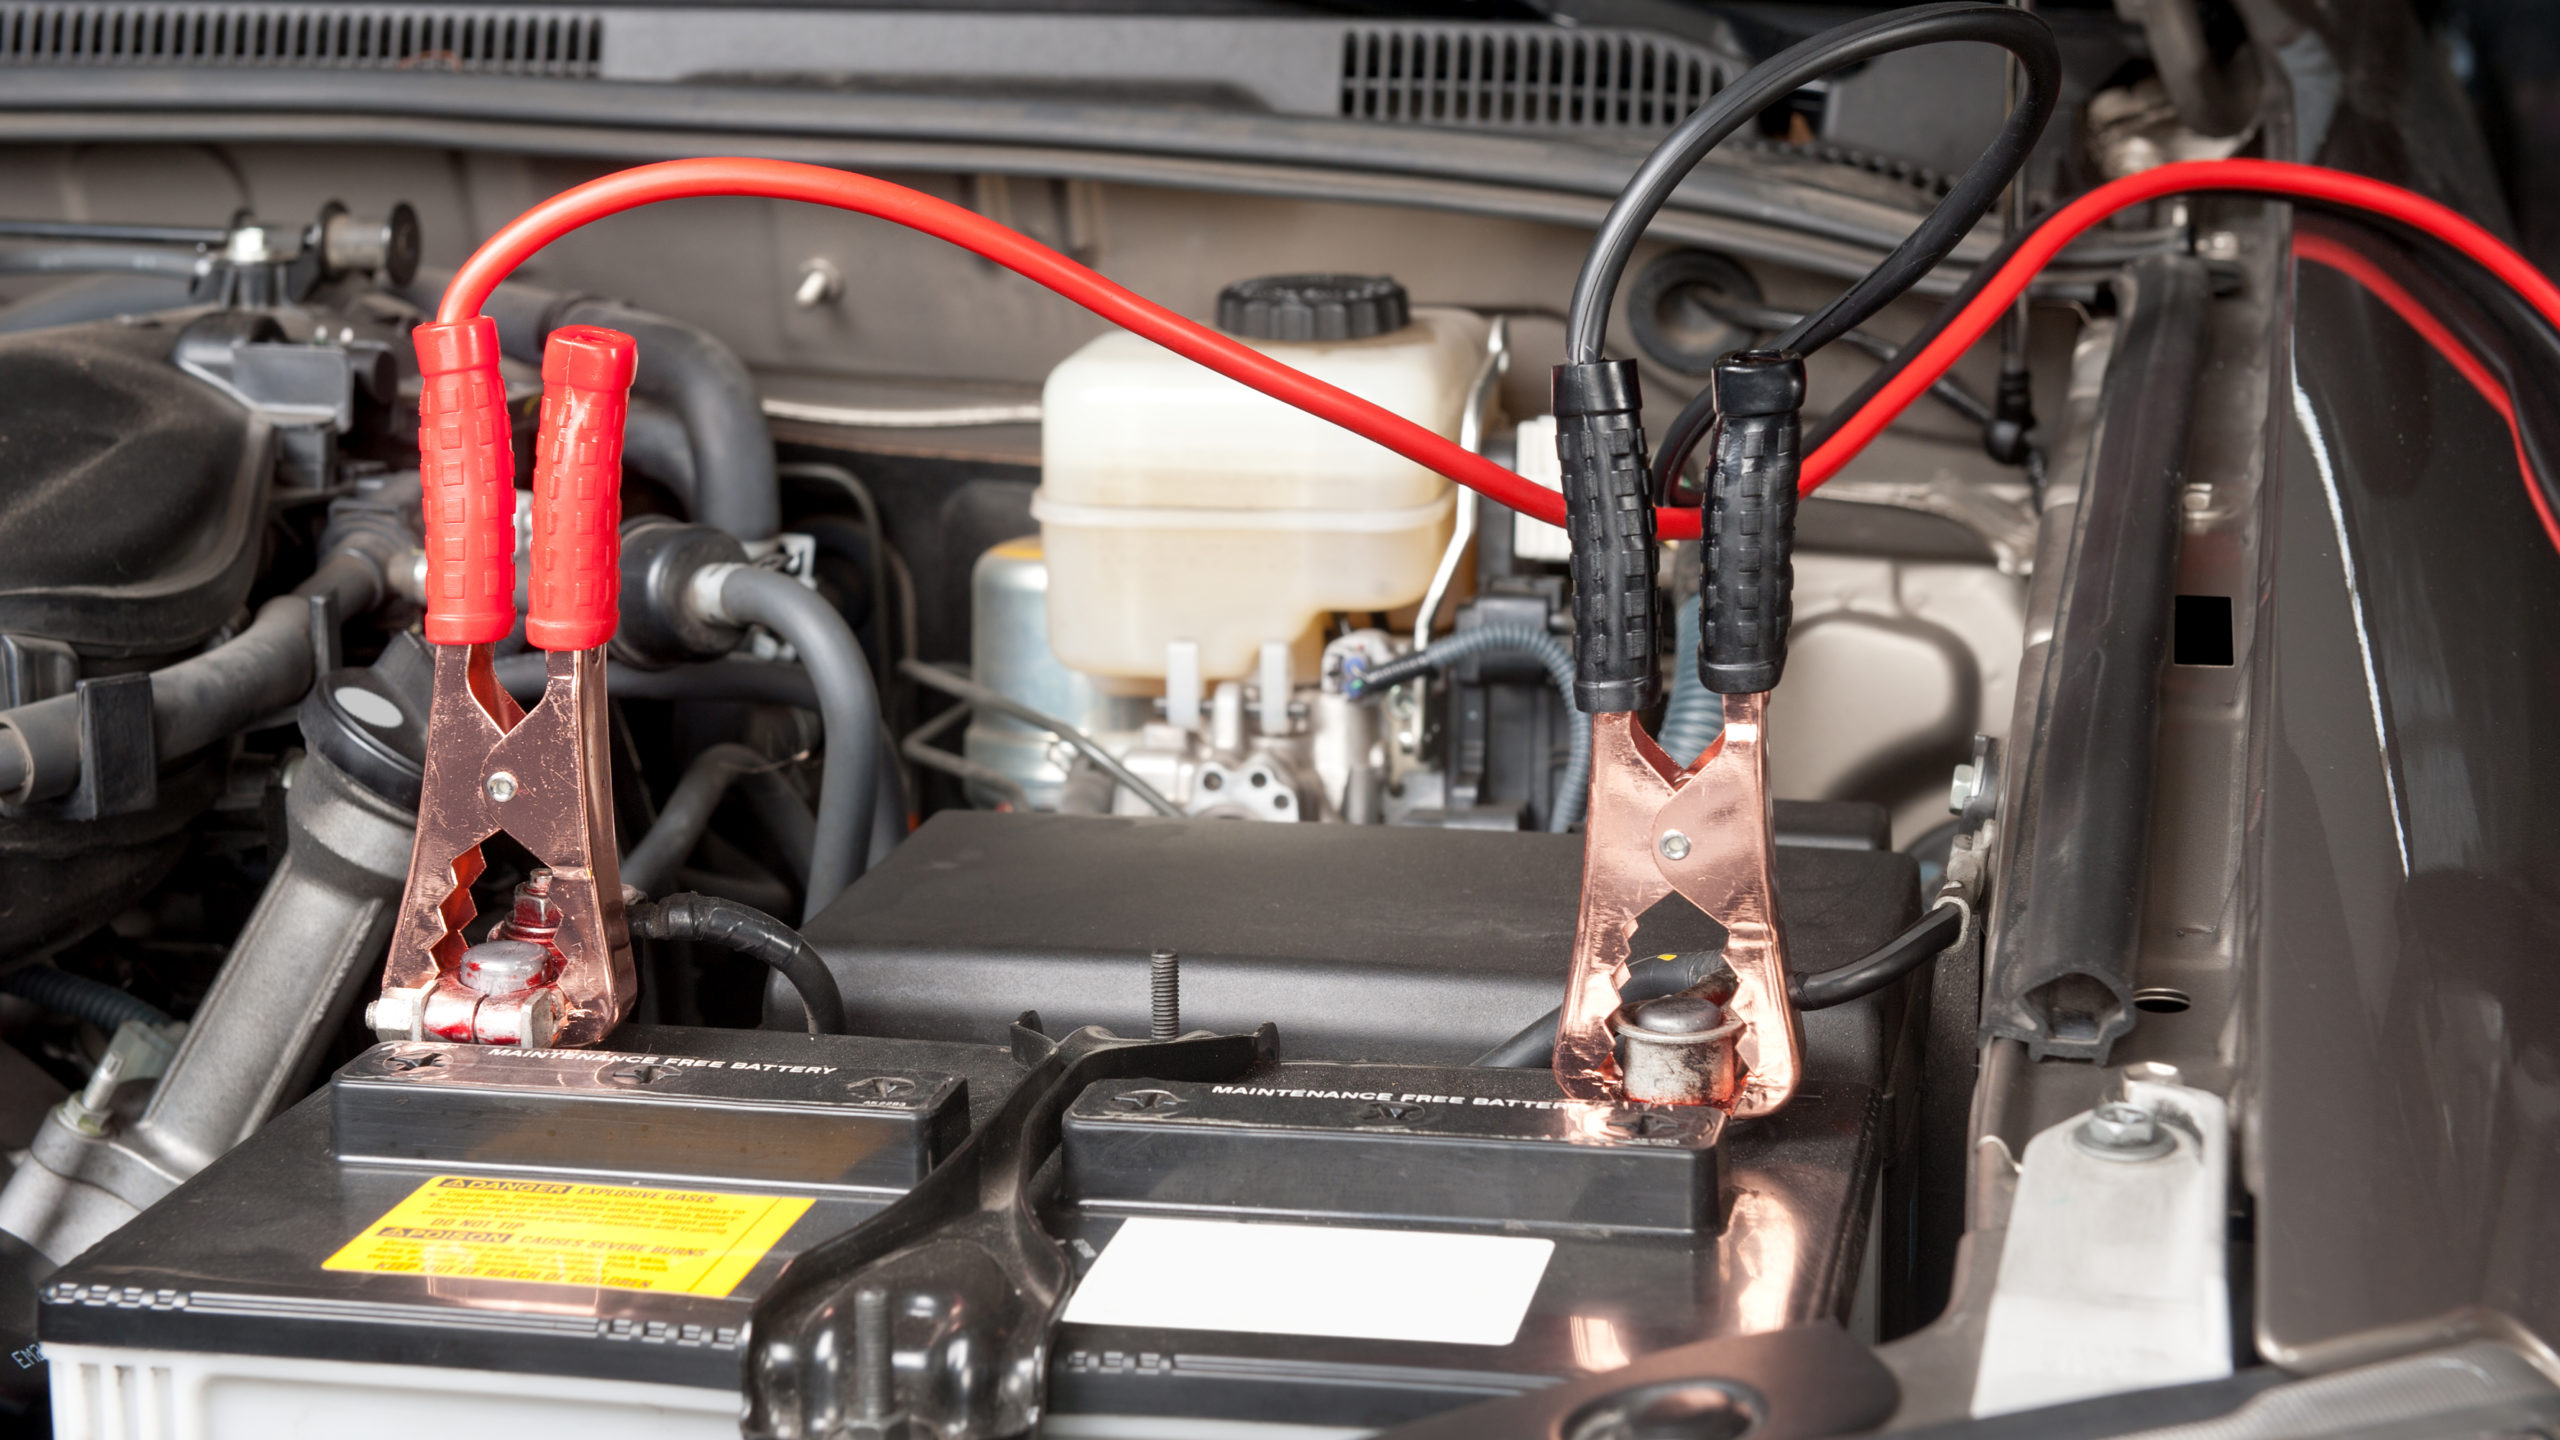 How to Use Jumper Cables - TrueCar Blog